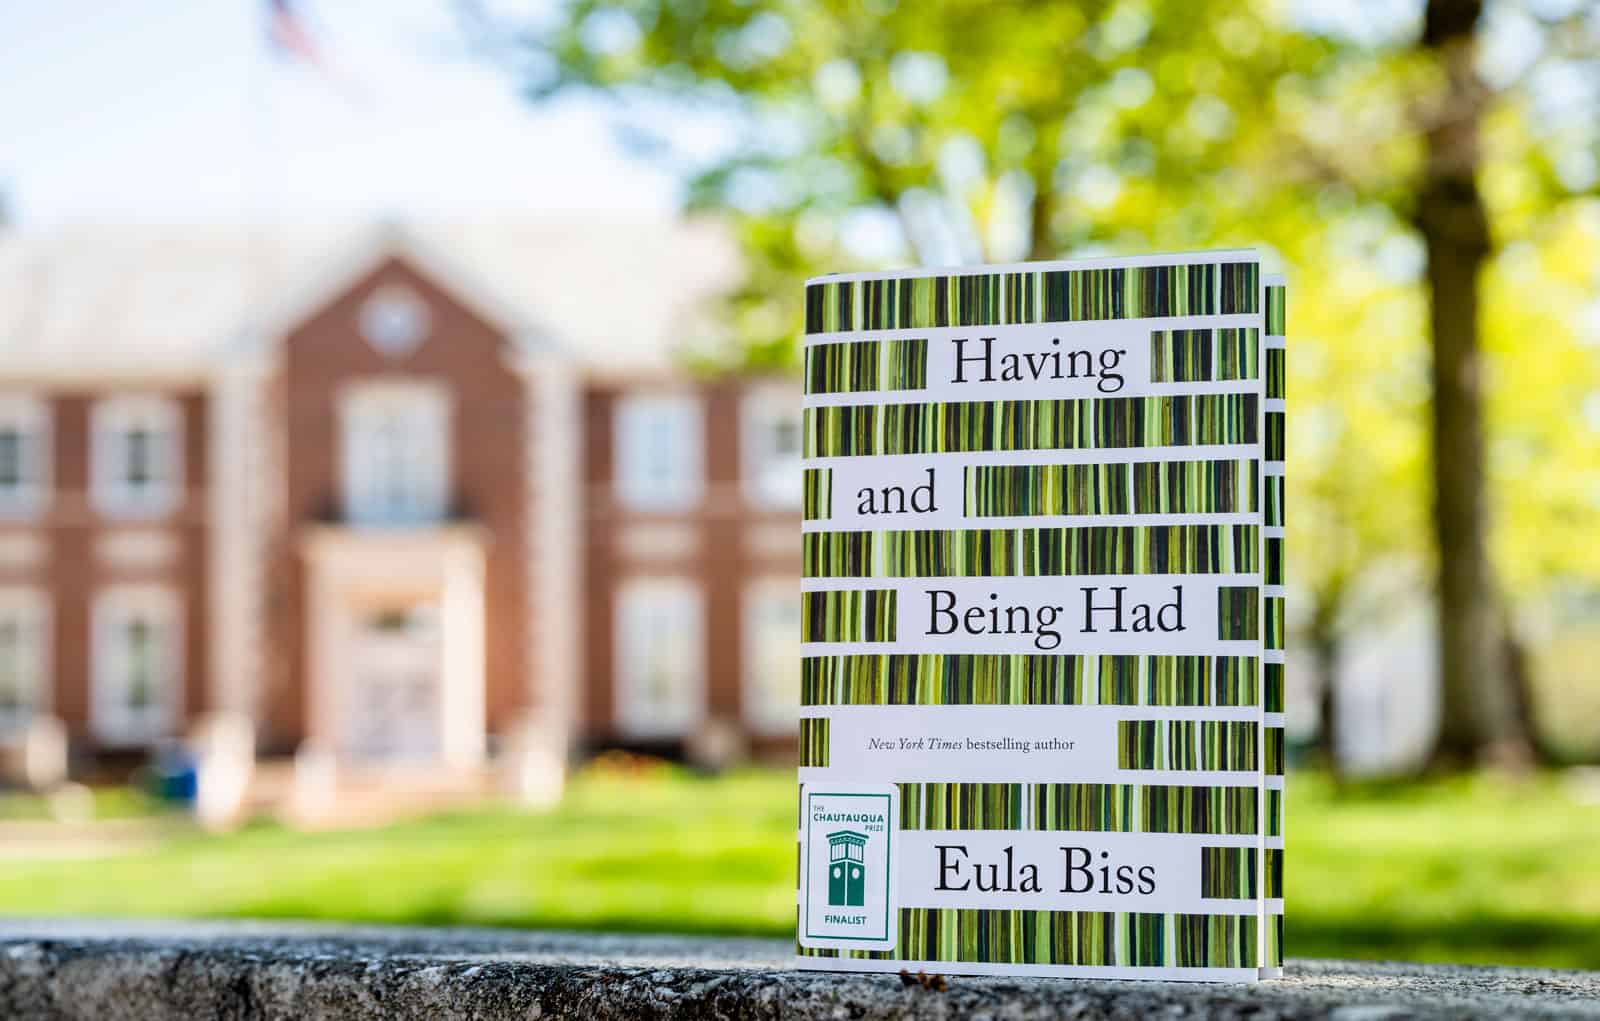 Have and Being Had by Eula Biss